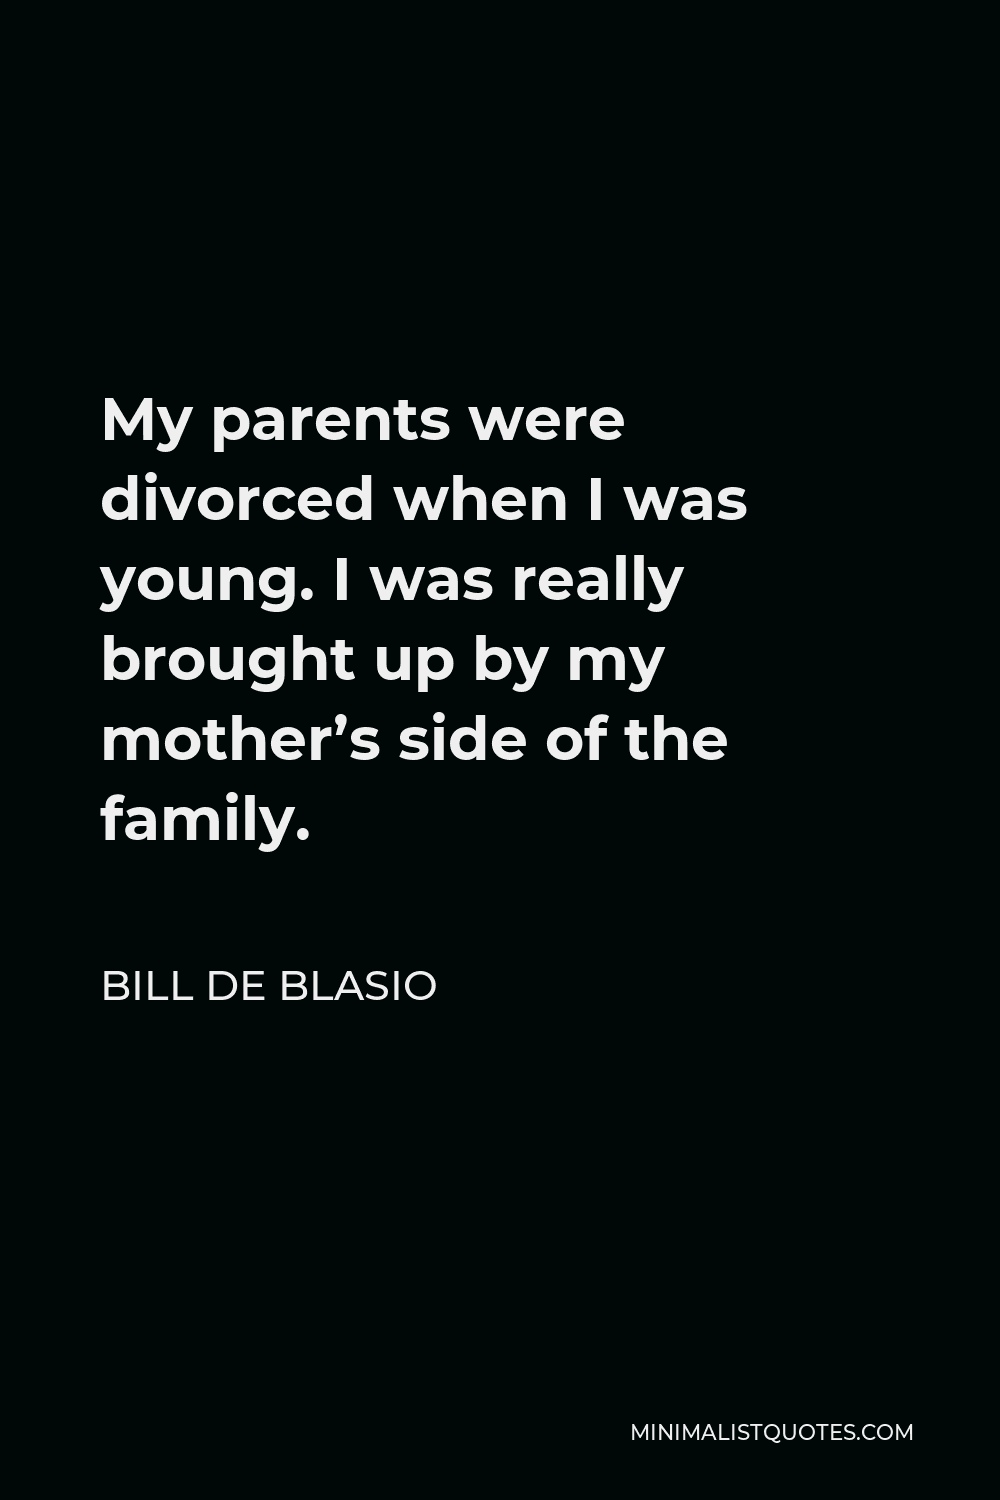 Bill de Blasio Quote - My parents were divorced when I was young. I was really brought up by my mother’s side of the family.